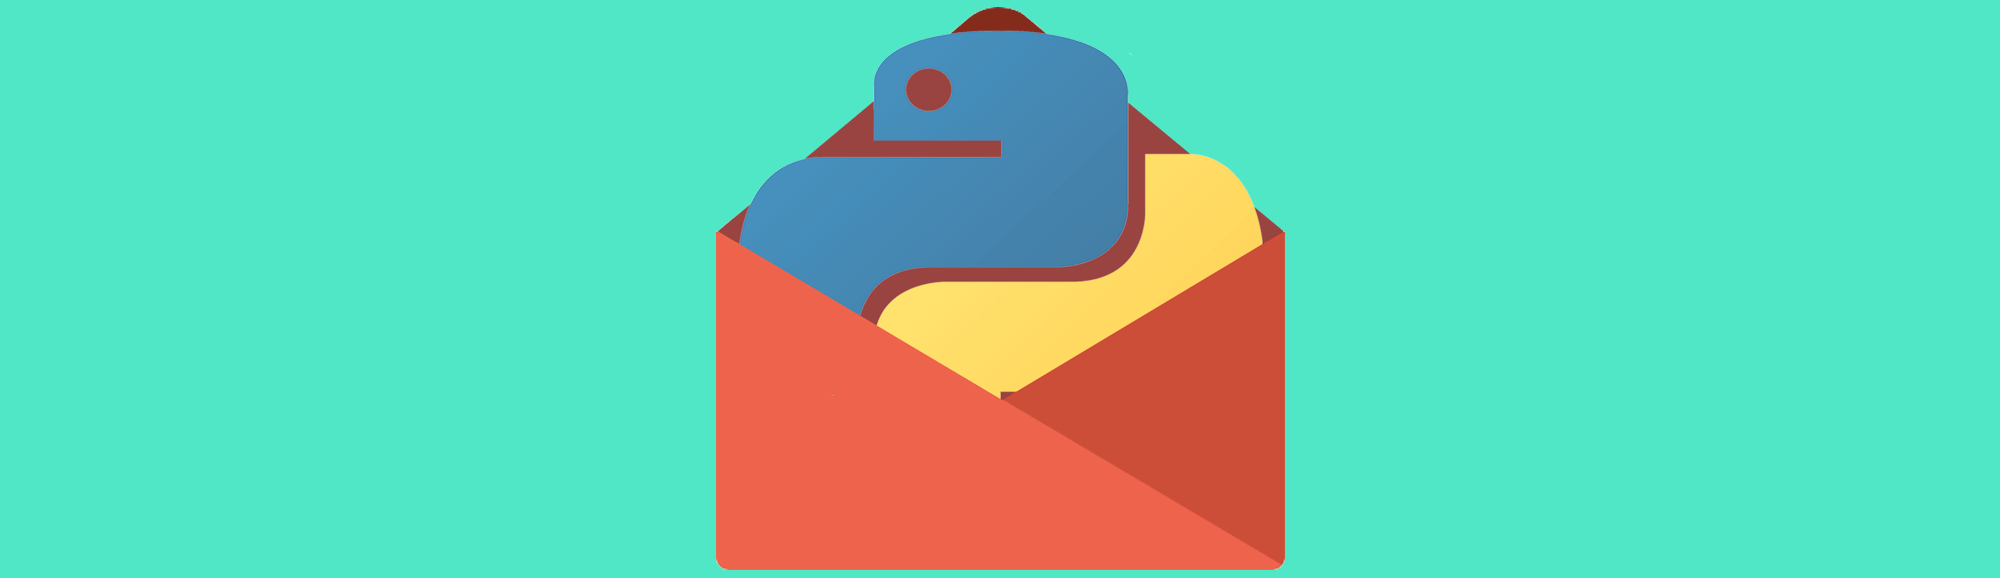 How To: Send Email using Python and SMTP